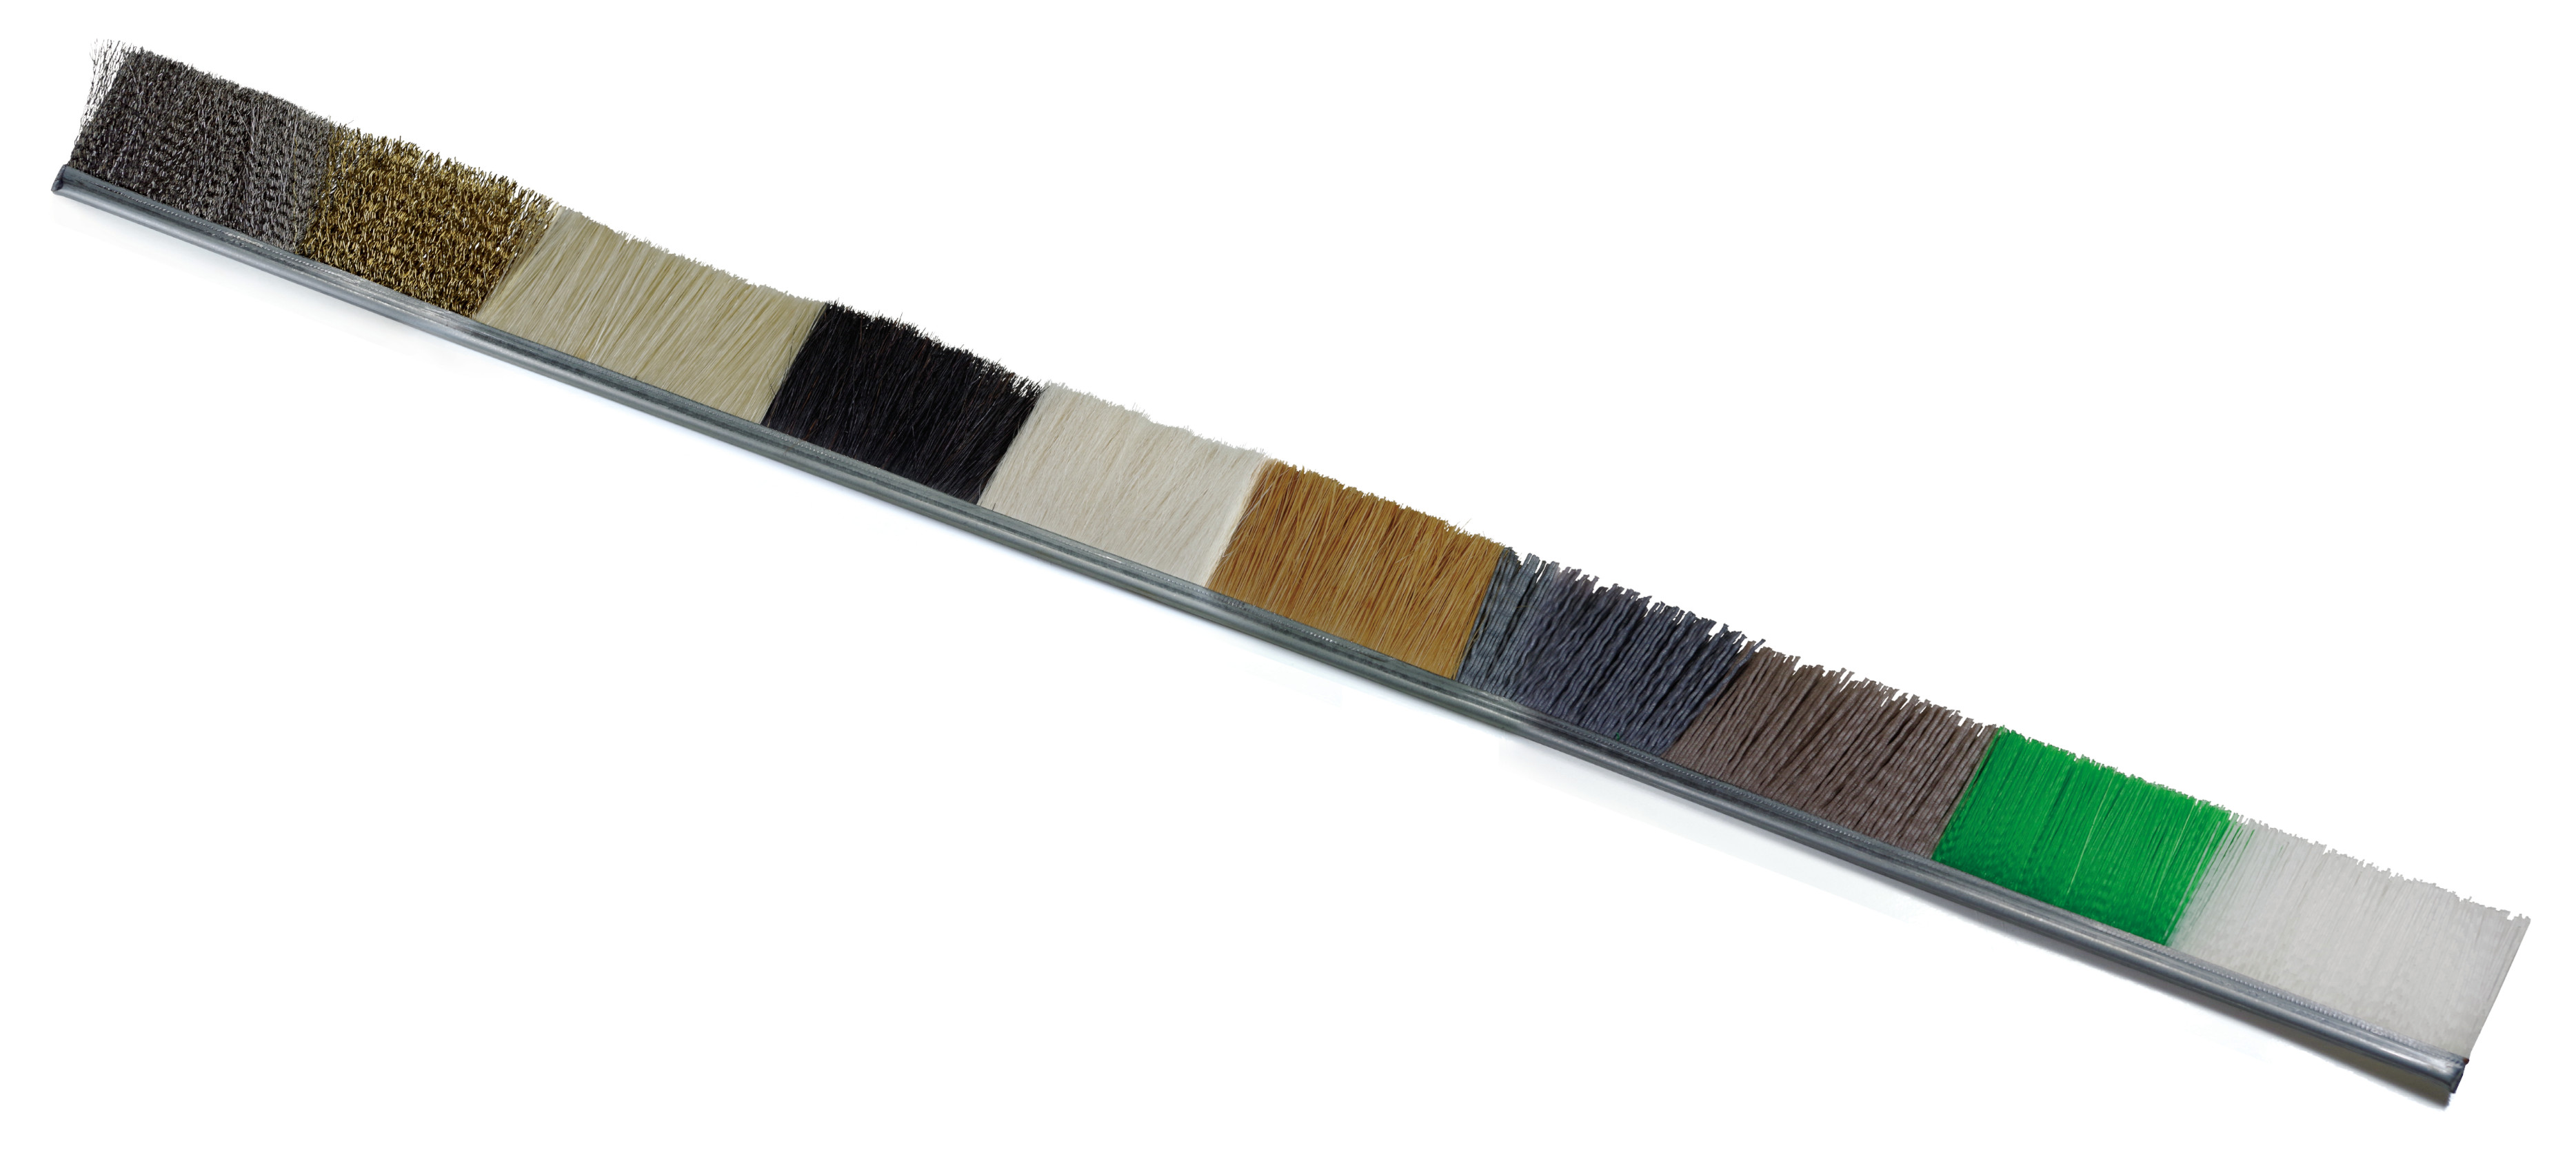 UNION STRIP BRUSH SERIES Variety of strip brushes in various widths and sizes-. 